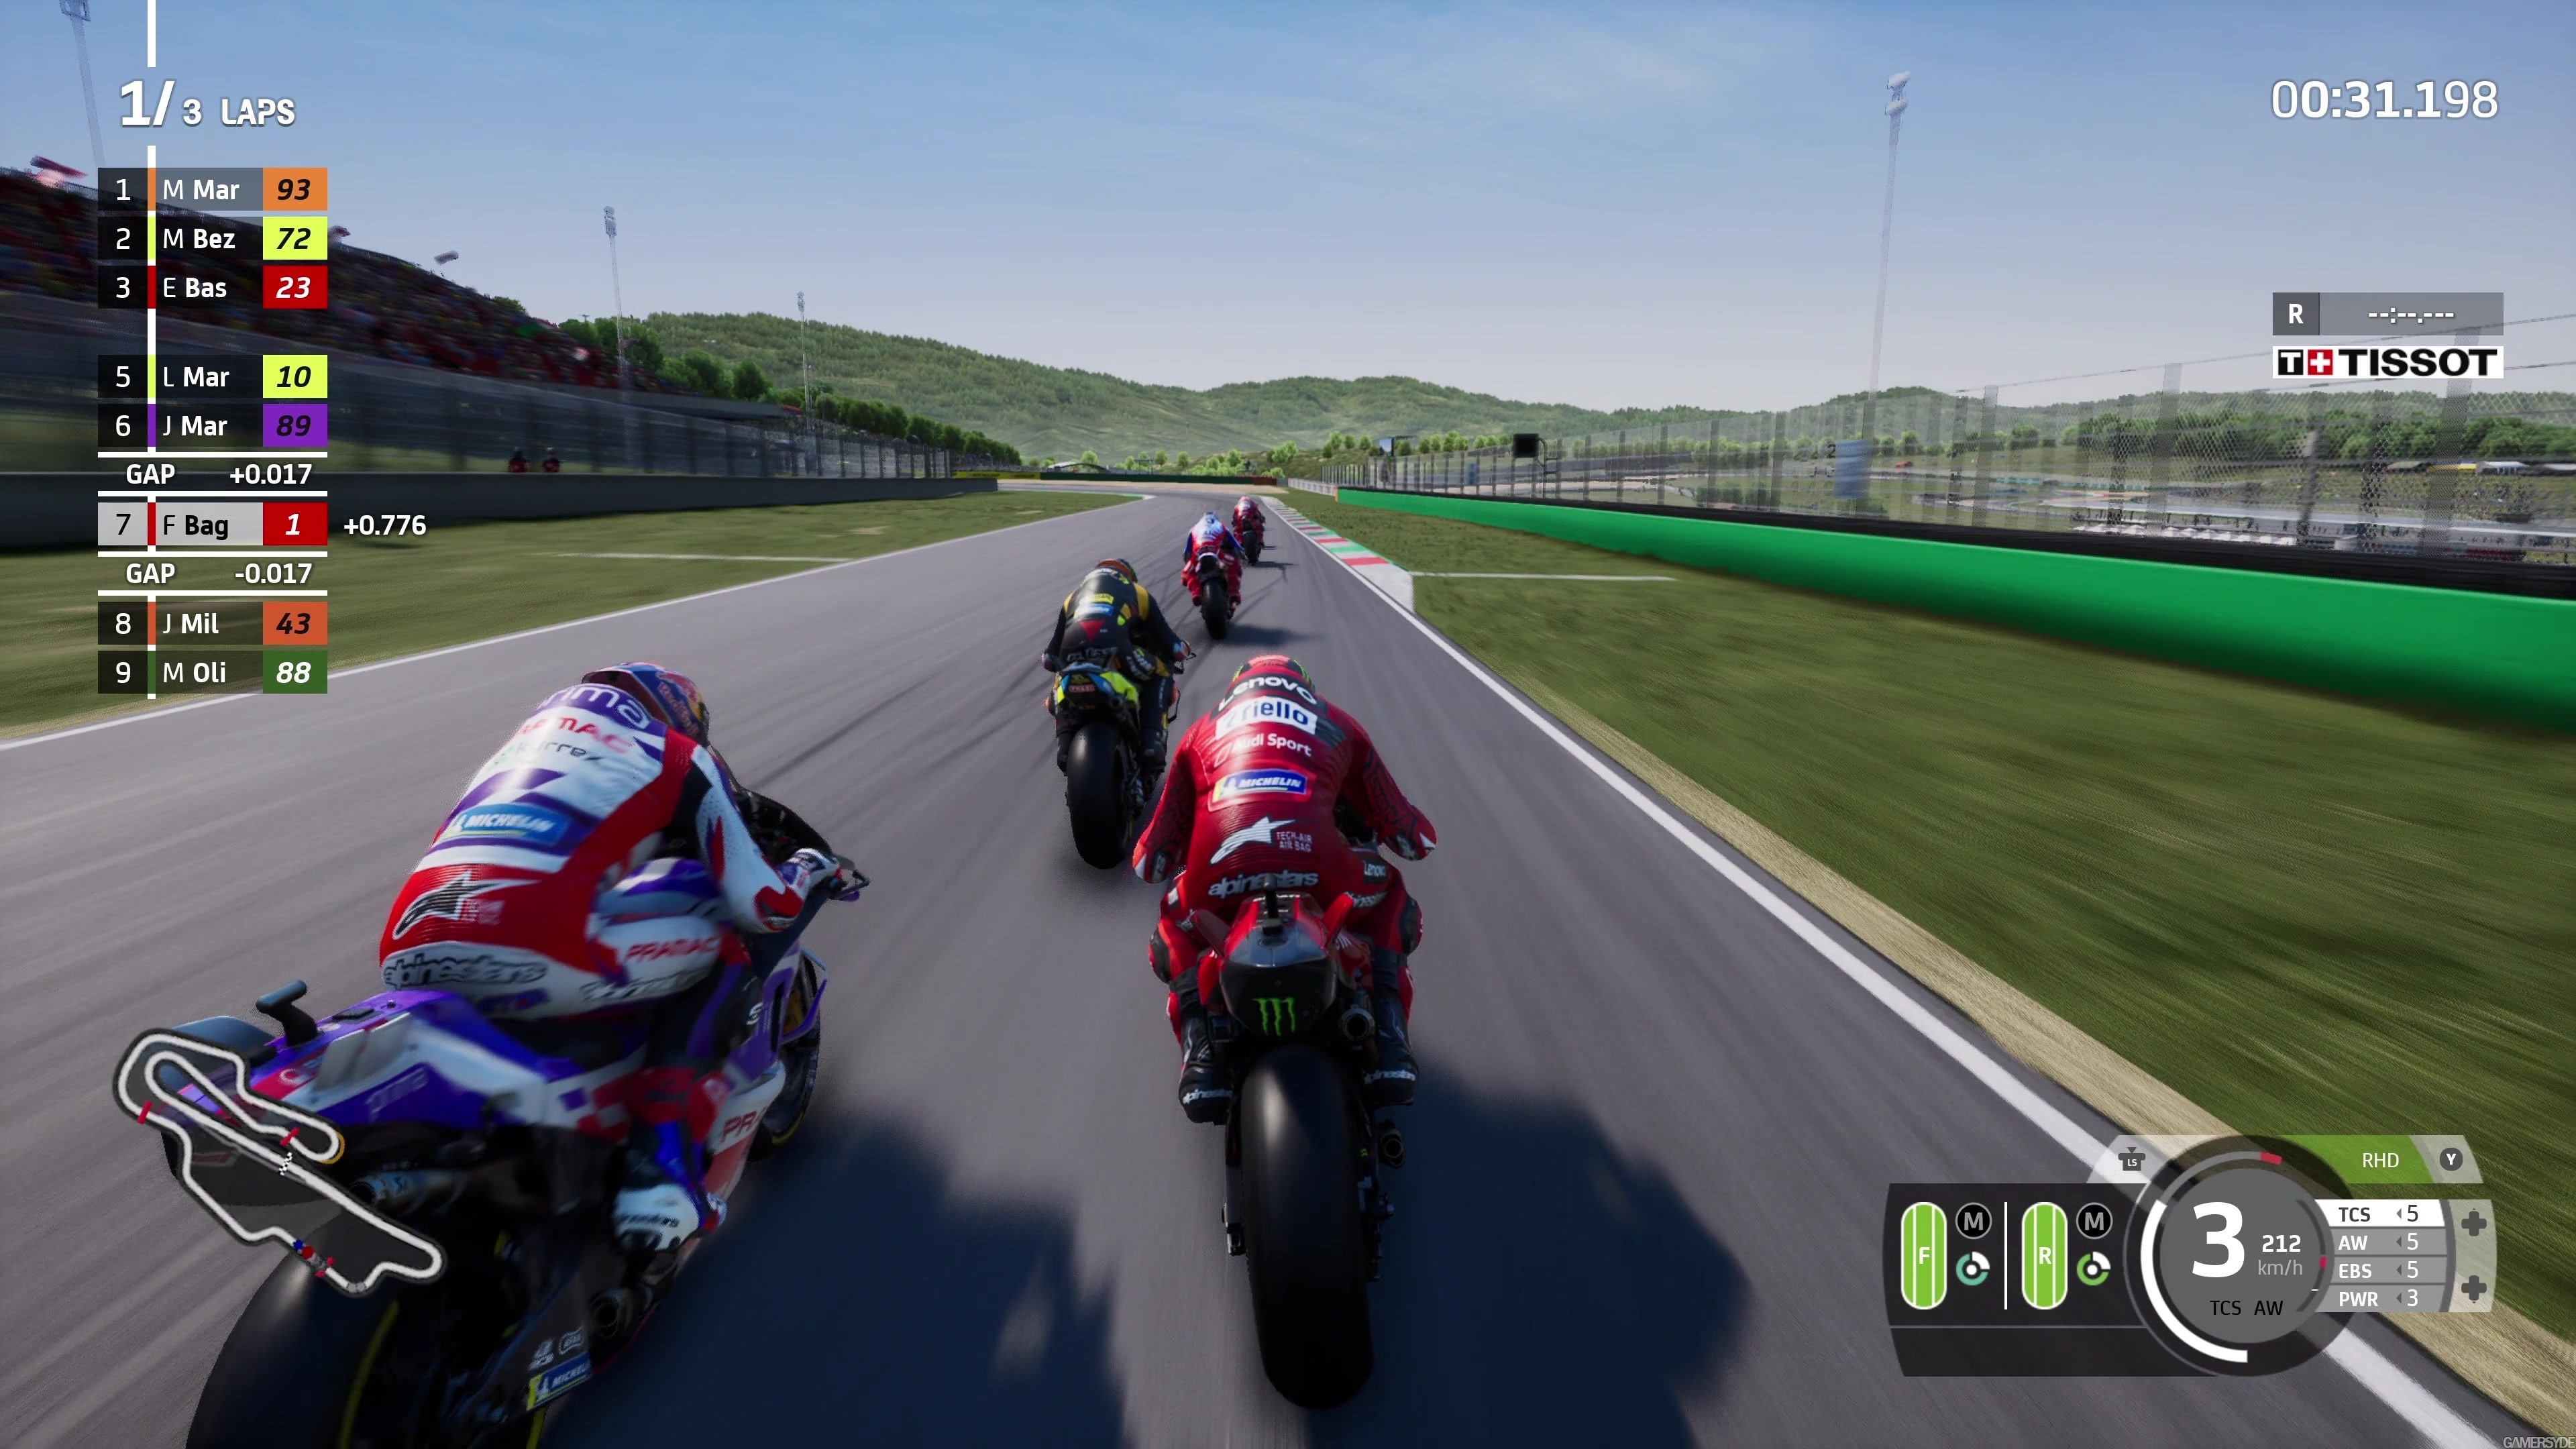 MotoGP 23 - 4K Gameplay - High quality stream and download